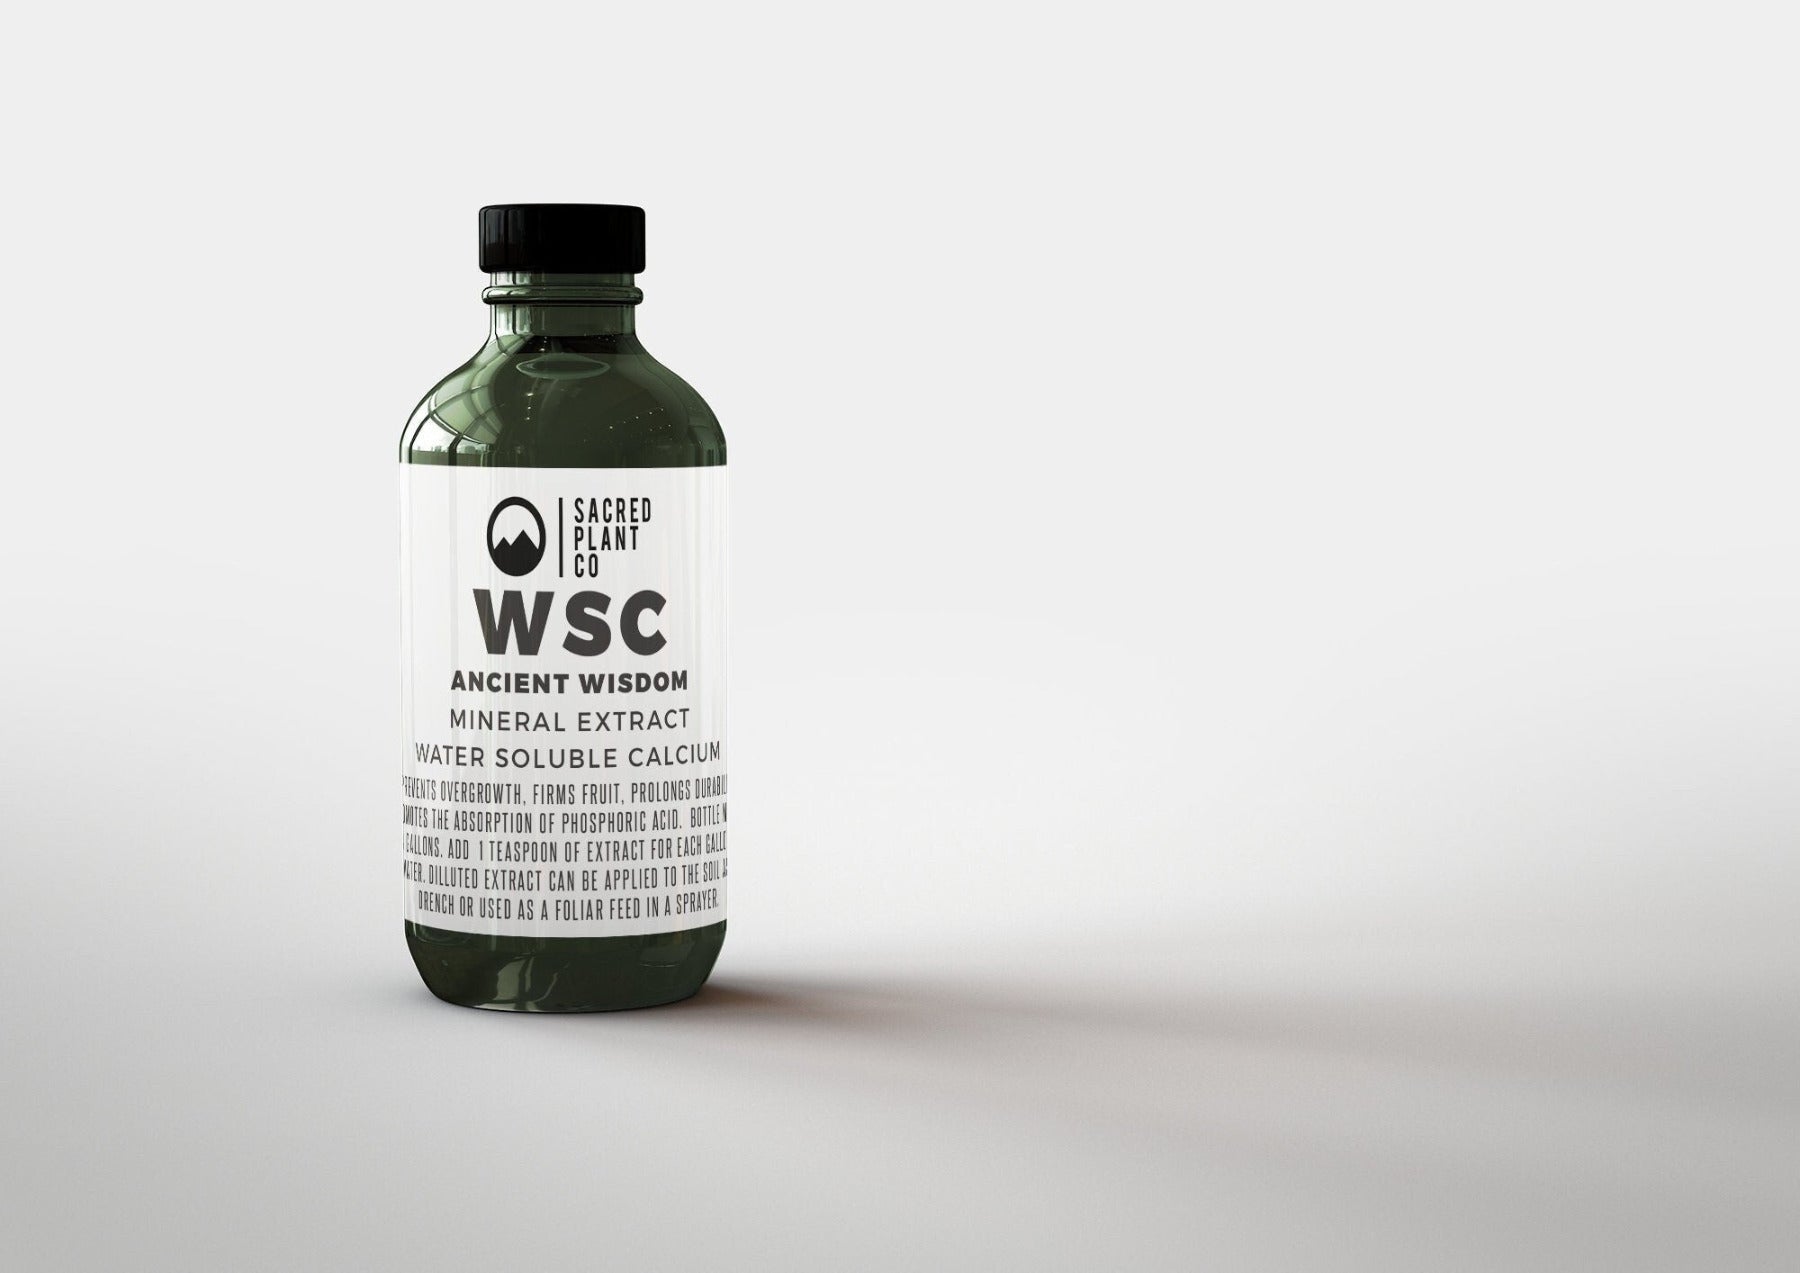 Bottle of our high-quality MINERAL EXTRACT - WSC, a key product showcasing the nutrient-rich produce of Low Water Colorado Mountain Herb Farm